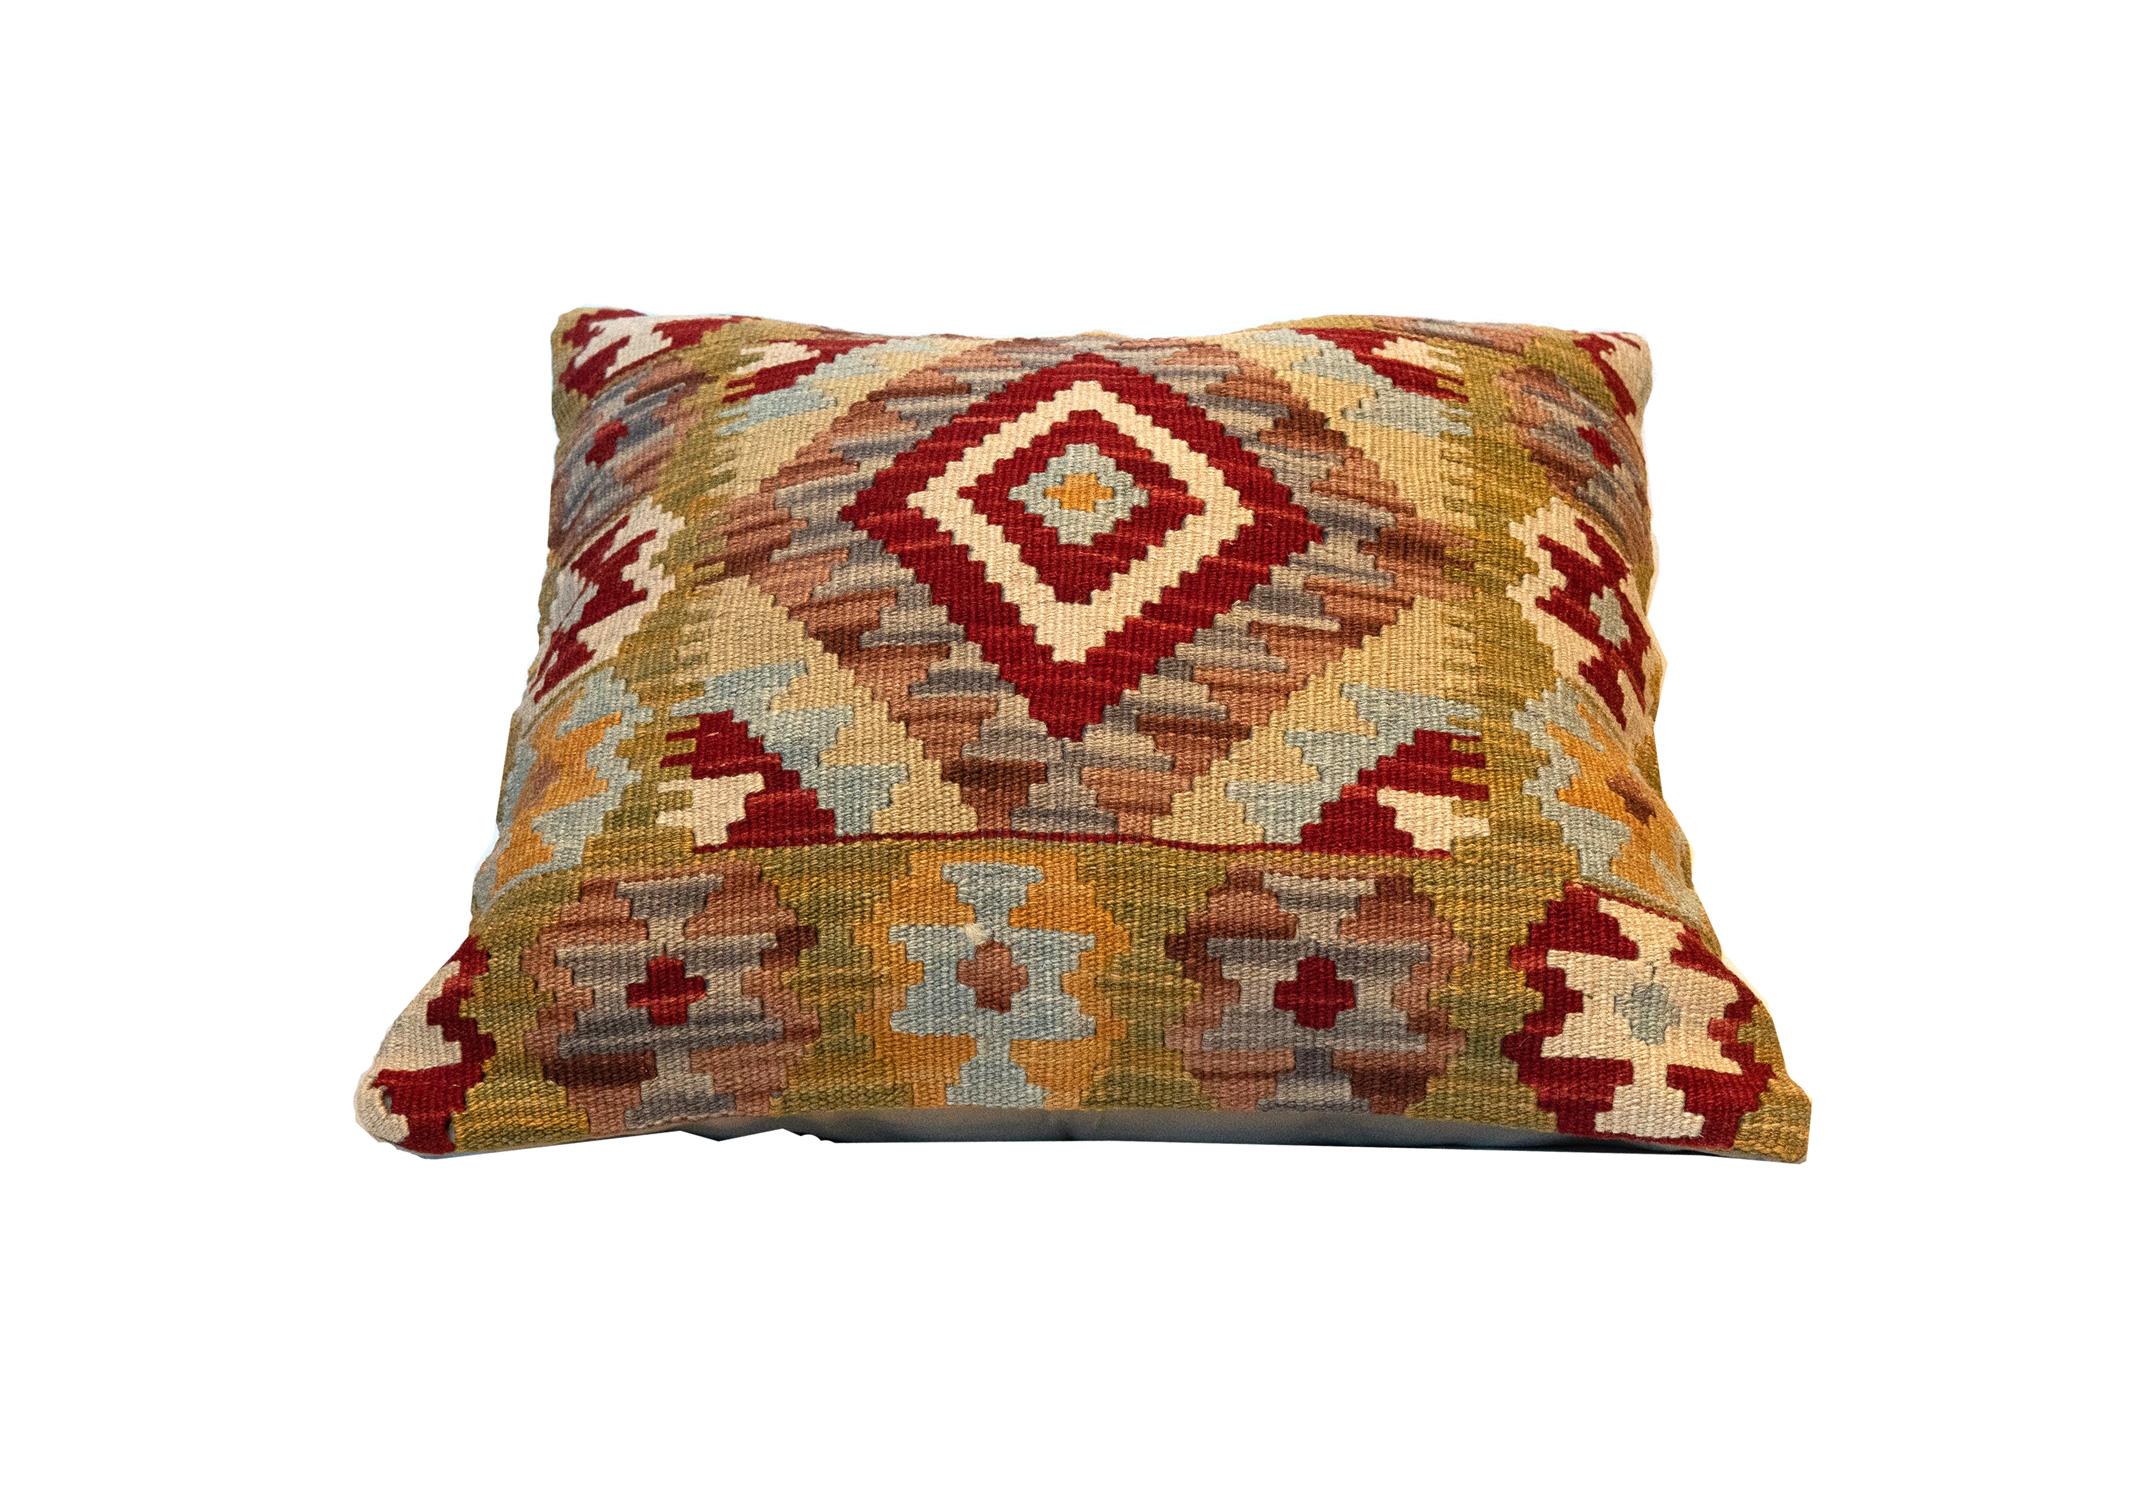 Rustic Handwoven Pillow Case, Wool Kilim Cushion Cover Beige Red